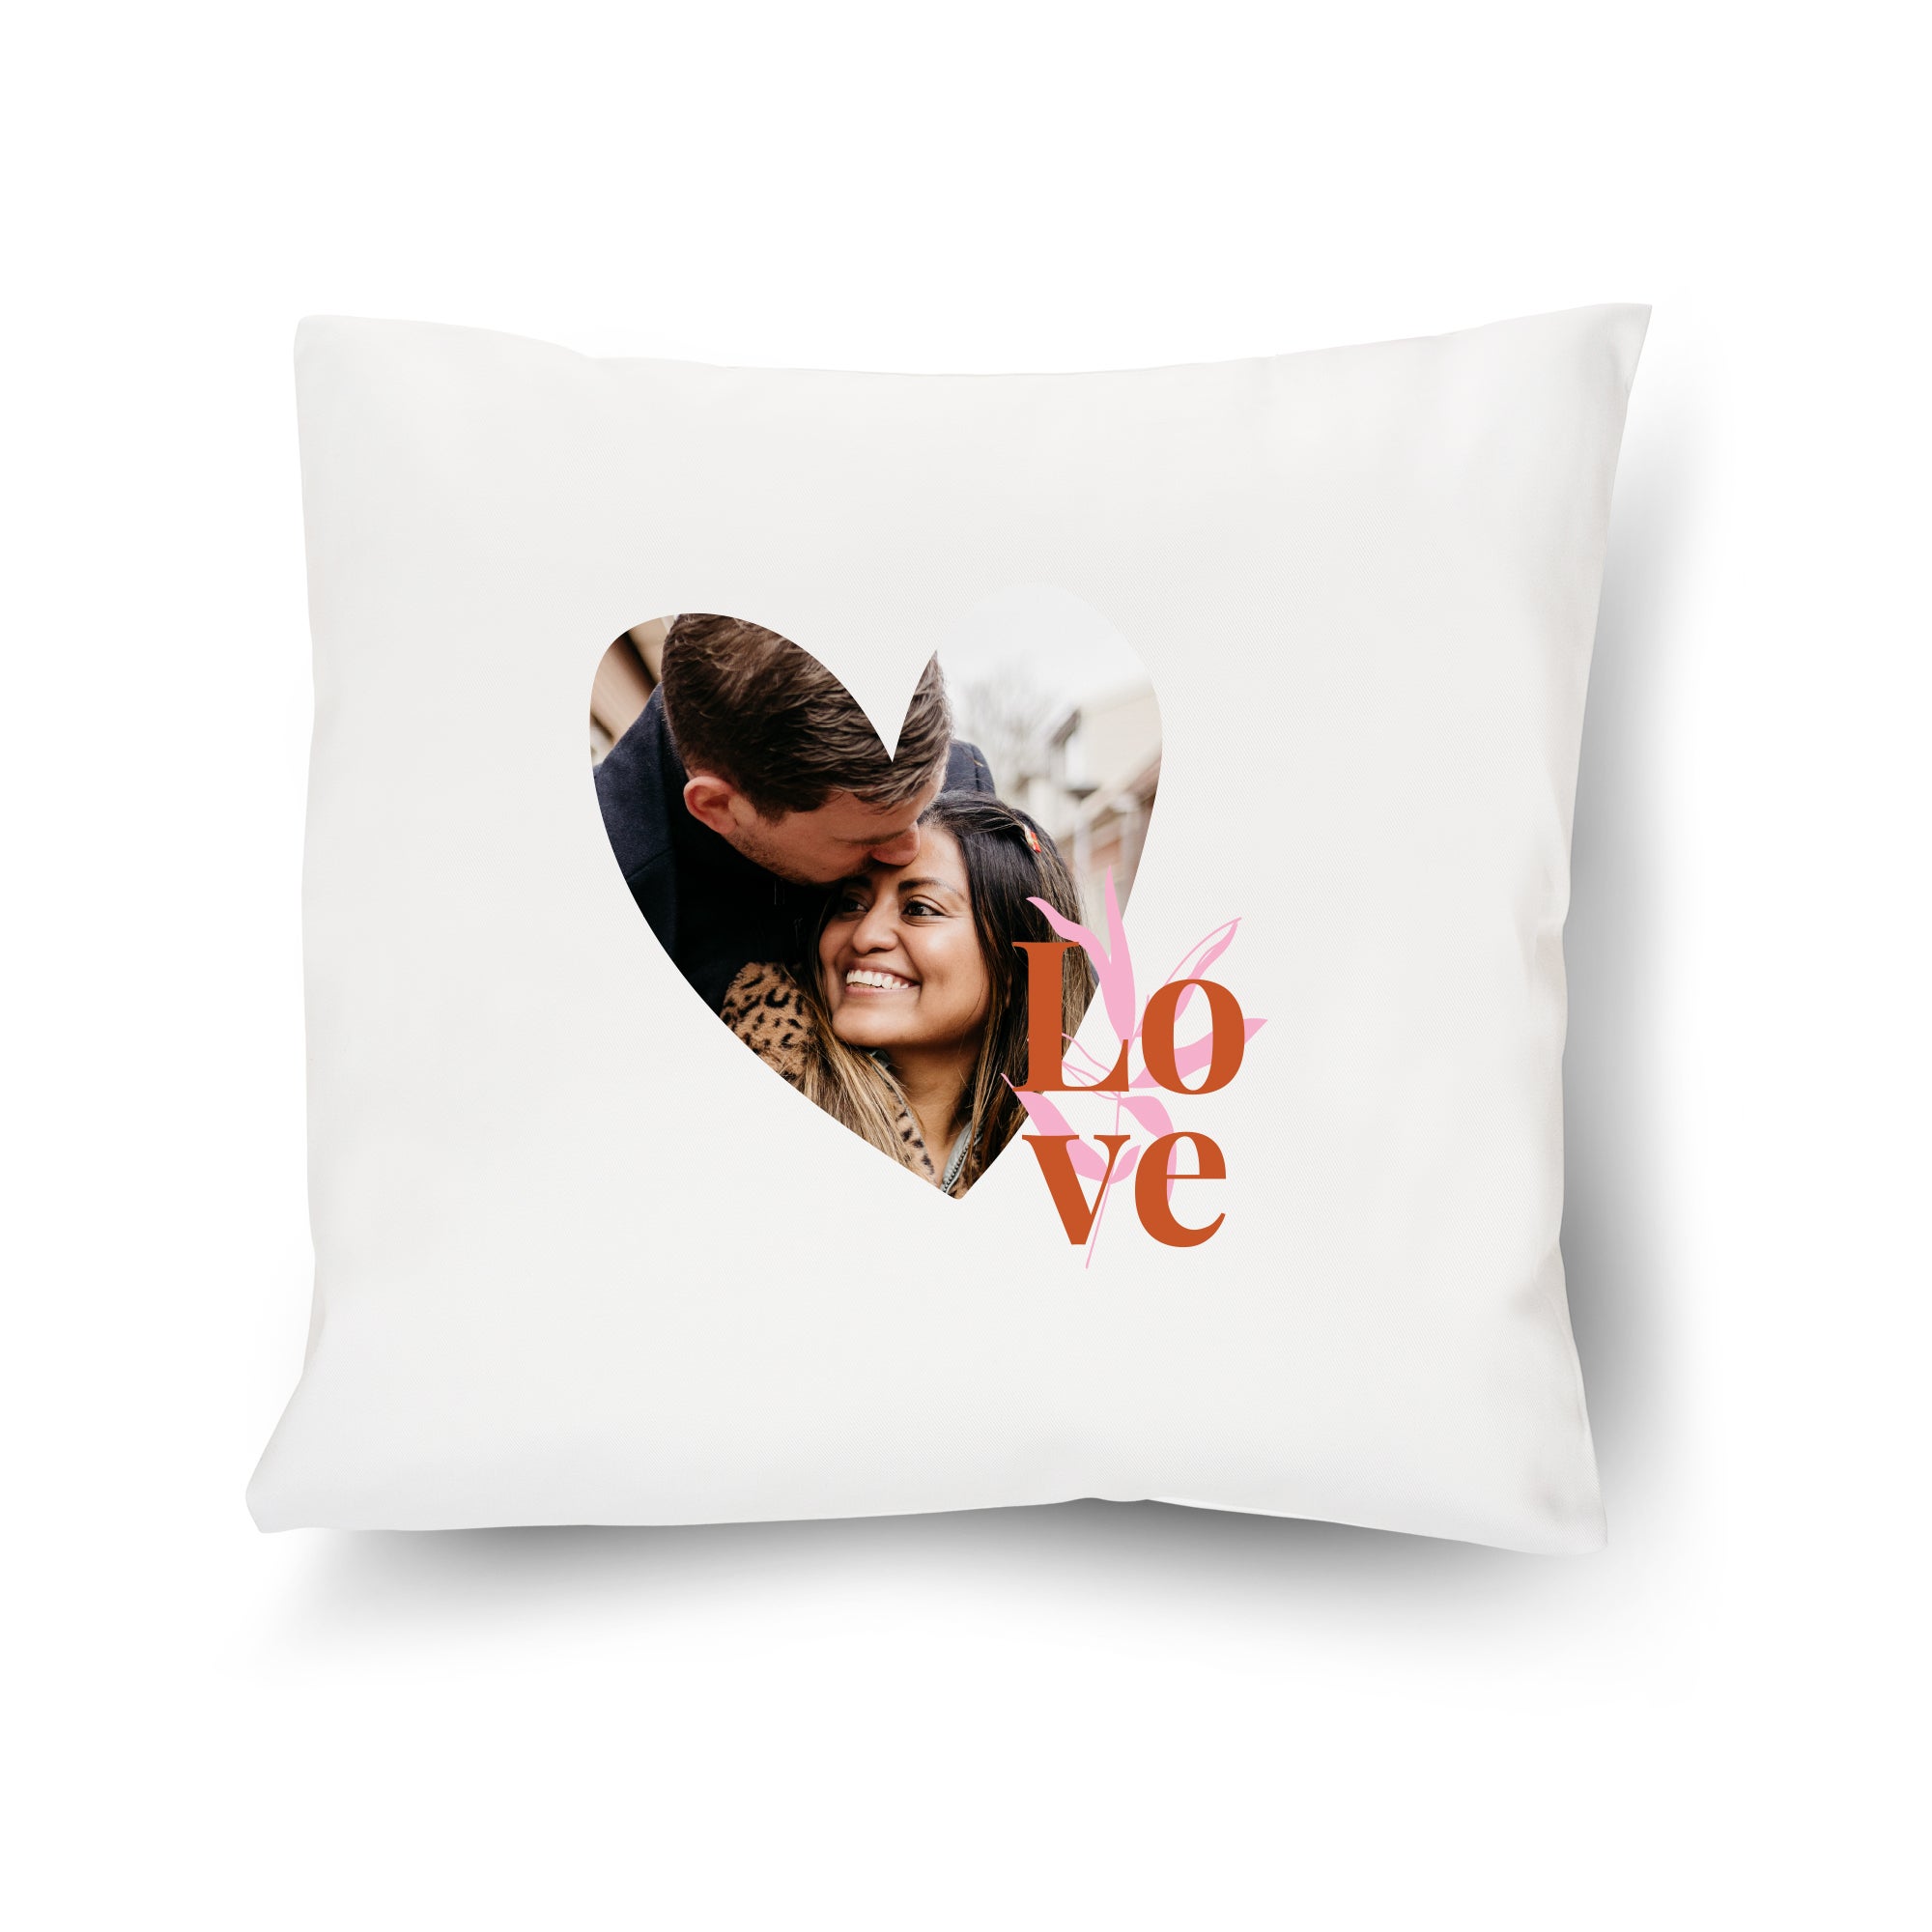 Ferocity Personalised Cushion Gift with your Photo and text 45 x 45 cm Print Image Gift for any Occasion 8 photo collage with filling 091 